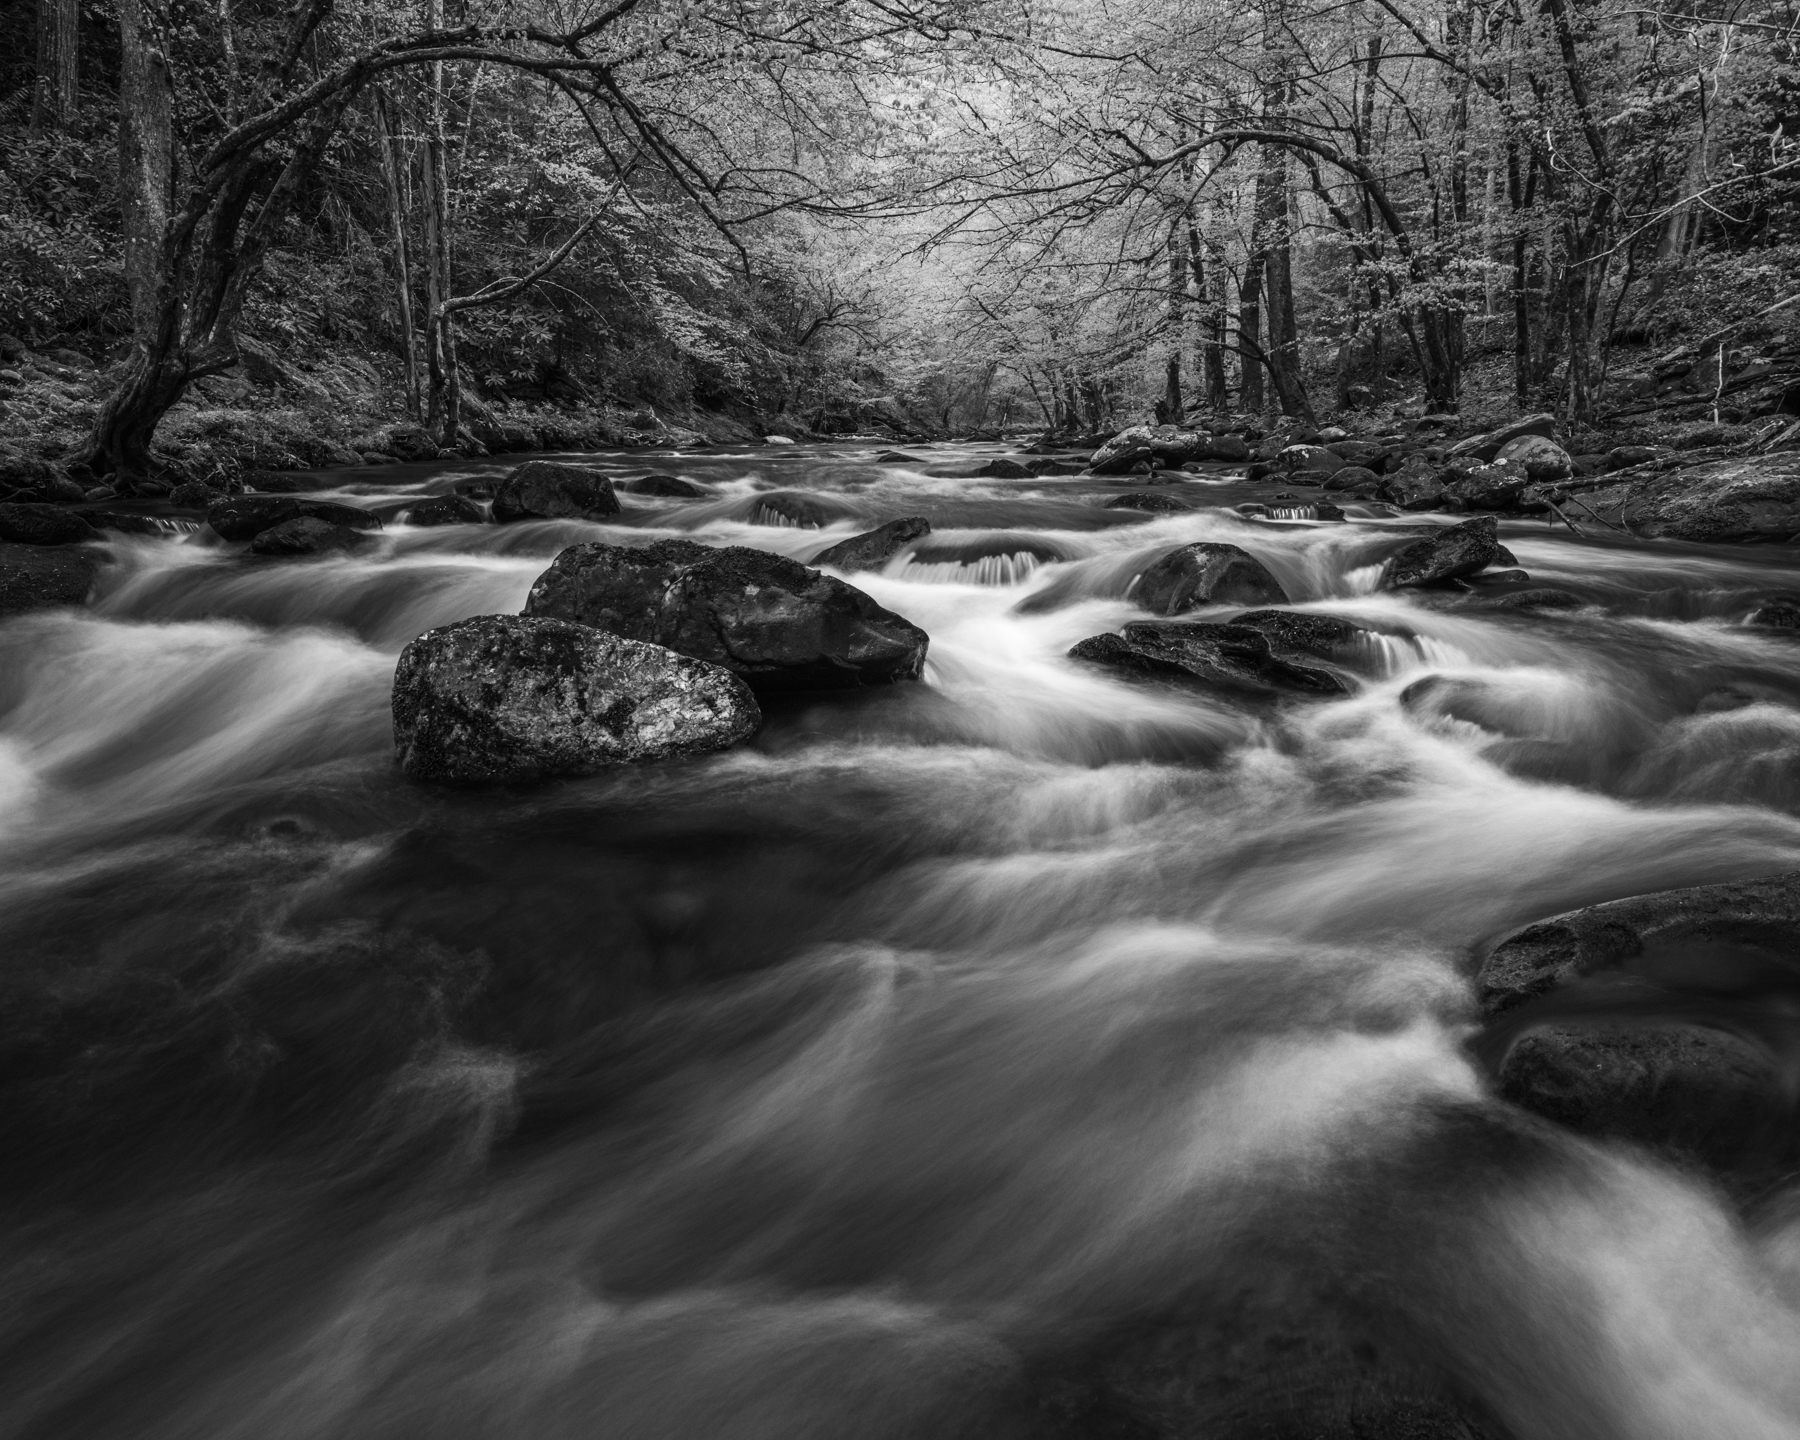 My favorite stream in the Smoky Mountains, Middle Prong of the Little River, captured in the spring on a wet April evening....